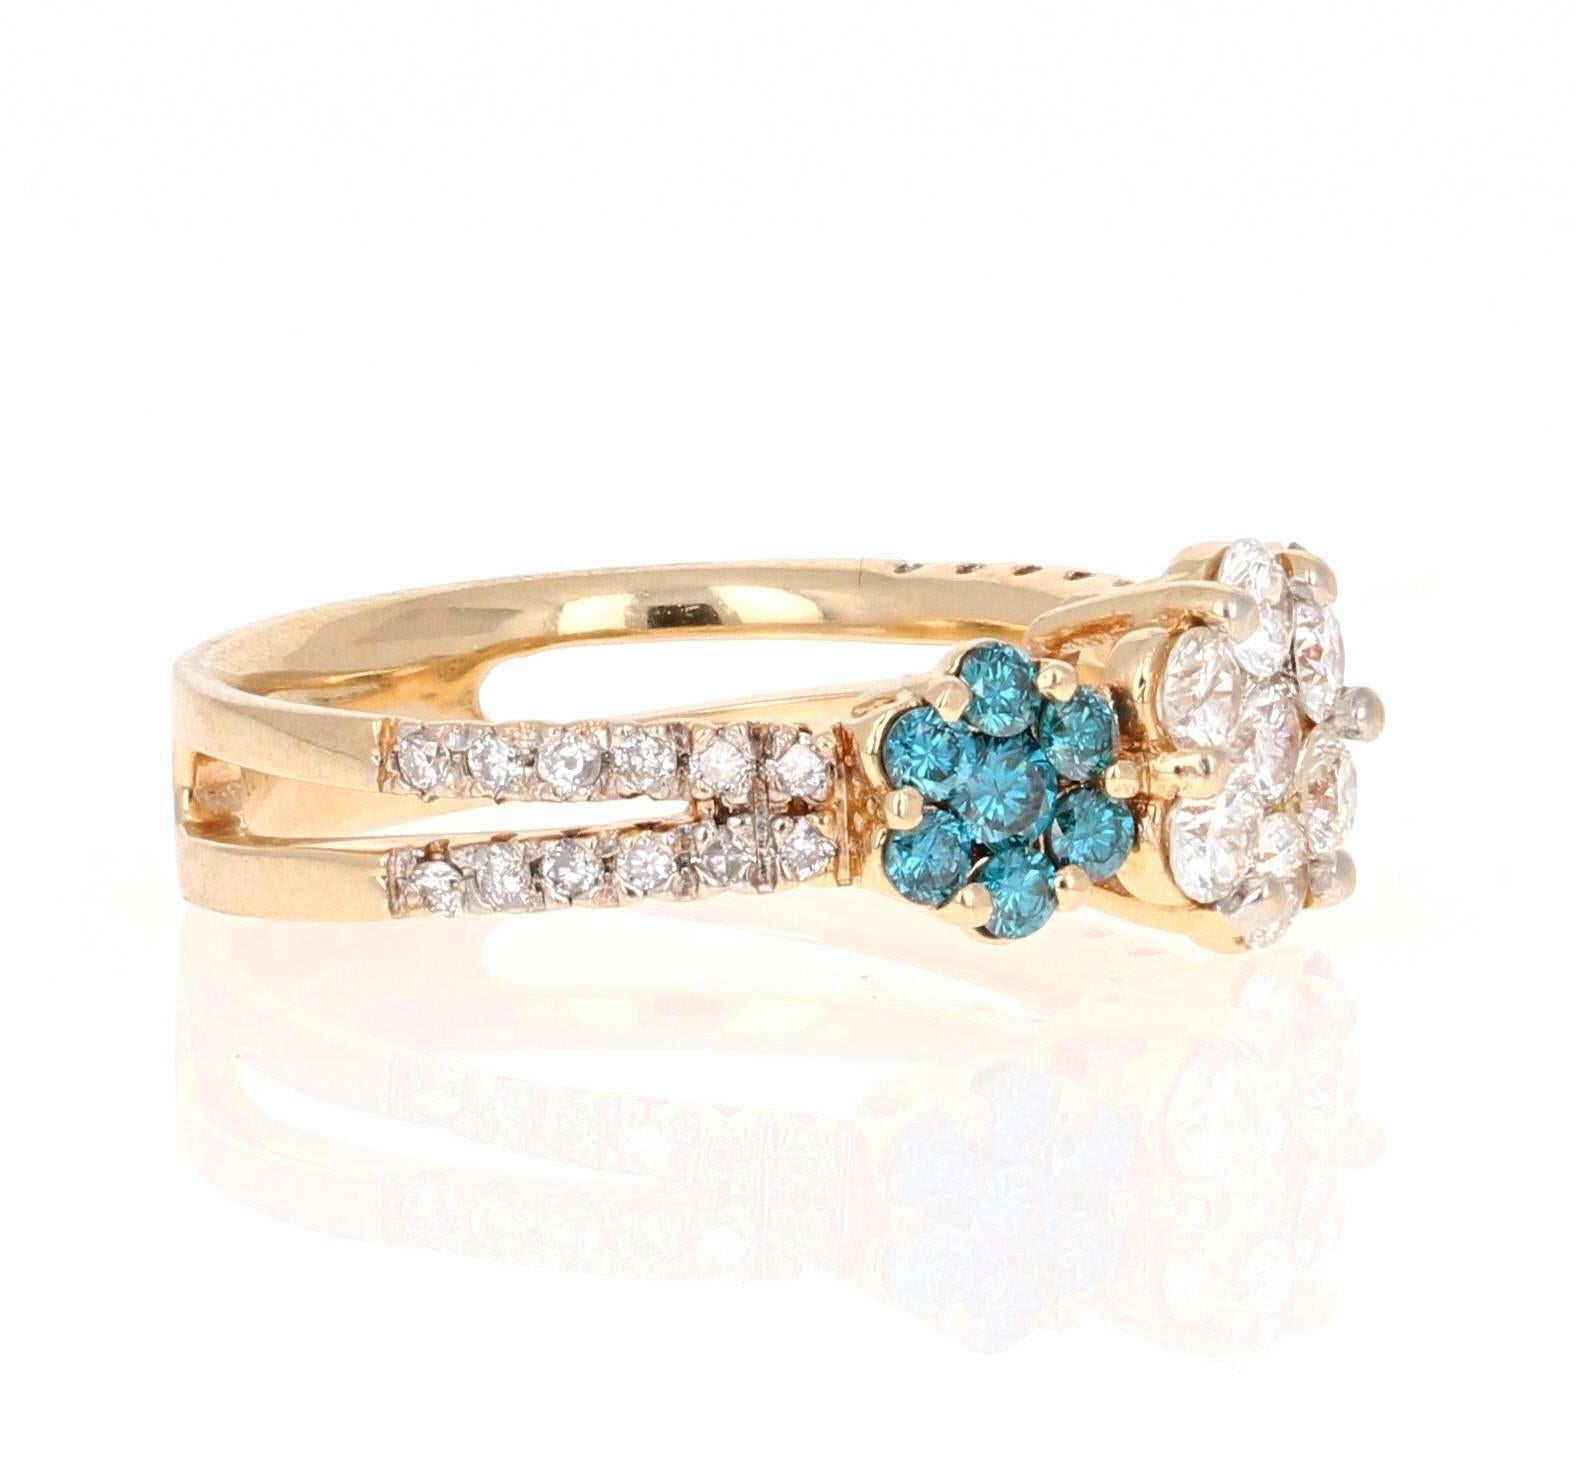 A cute and dainty flower design ring!  This pretty blue diamond cocktail ring can be a great addition to your jewelry collection.  The ring has 14 Blue Round Cut Diamonds that weigh 0.46 carats and 31 White Round Cut Diamonds that weigh 0.85 carats 